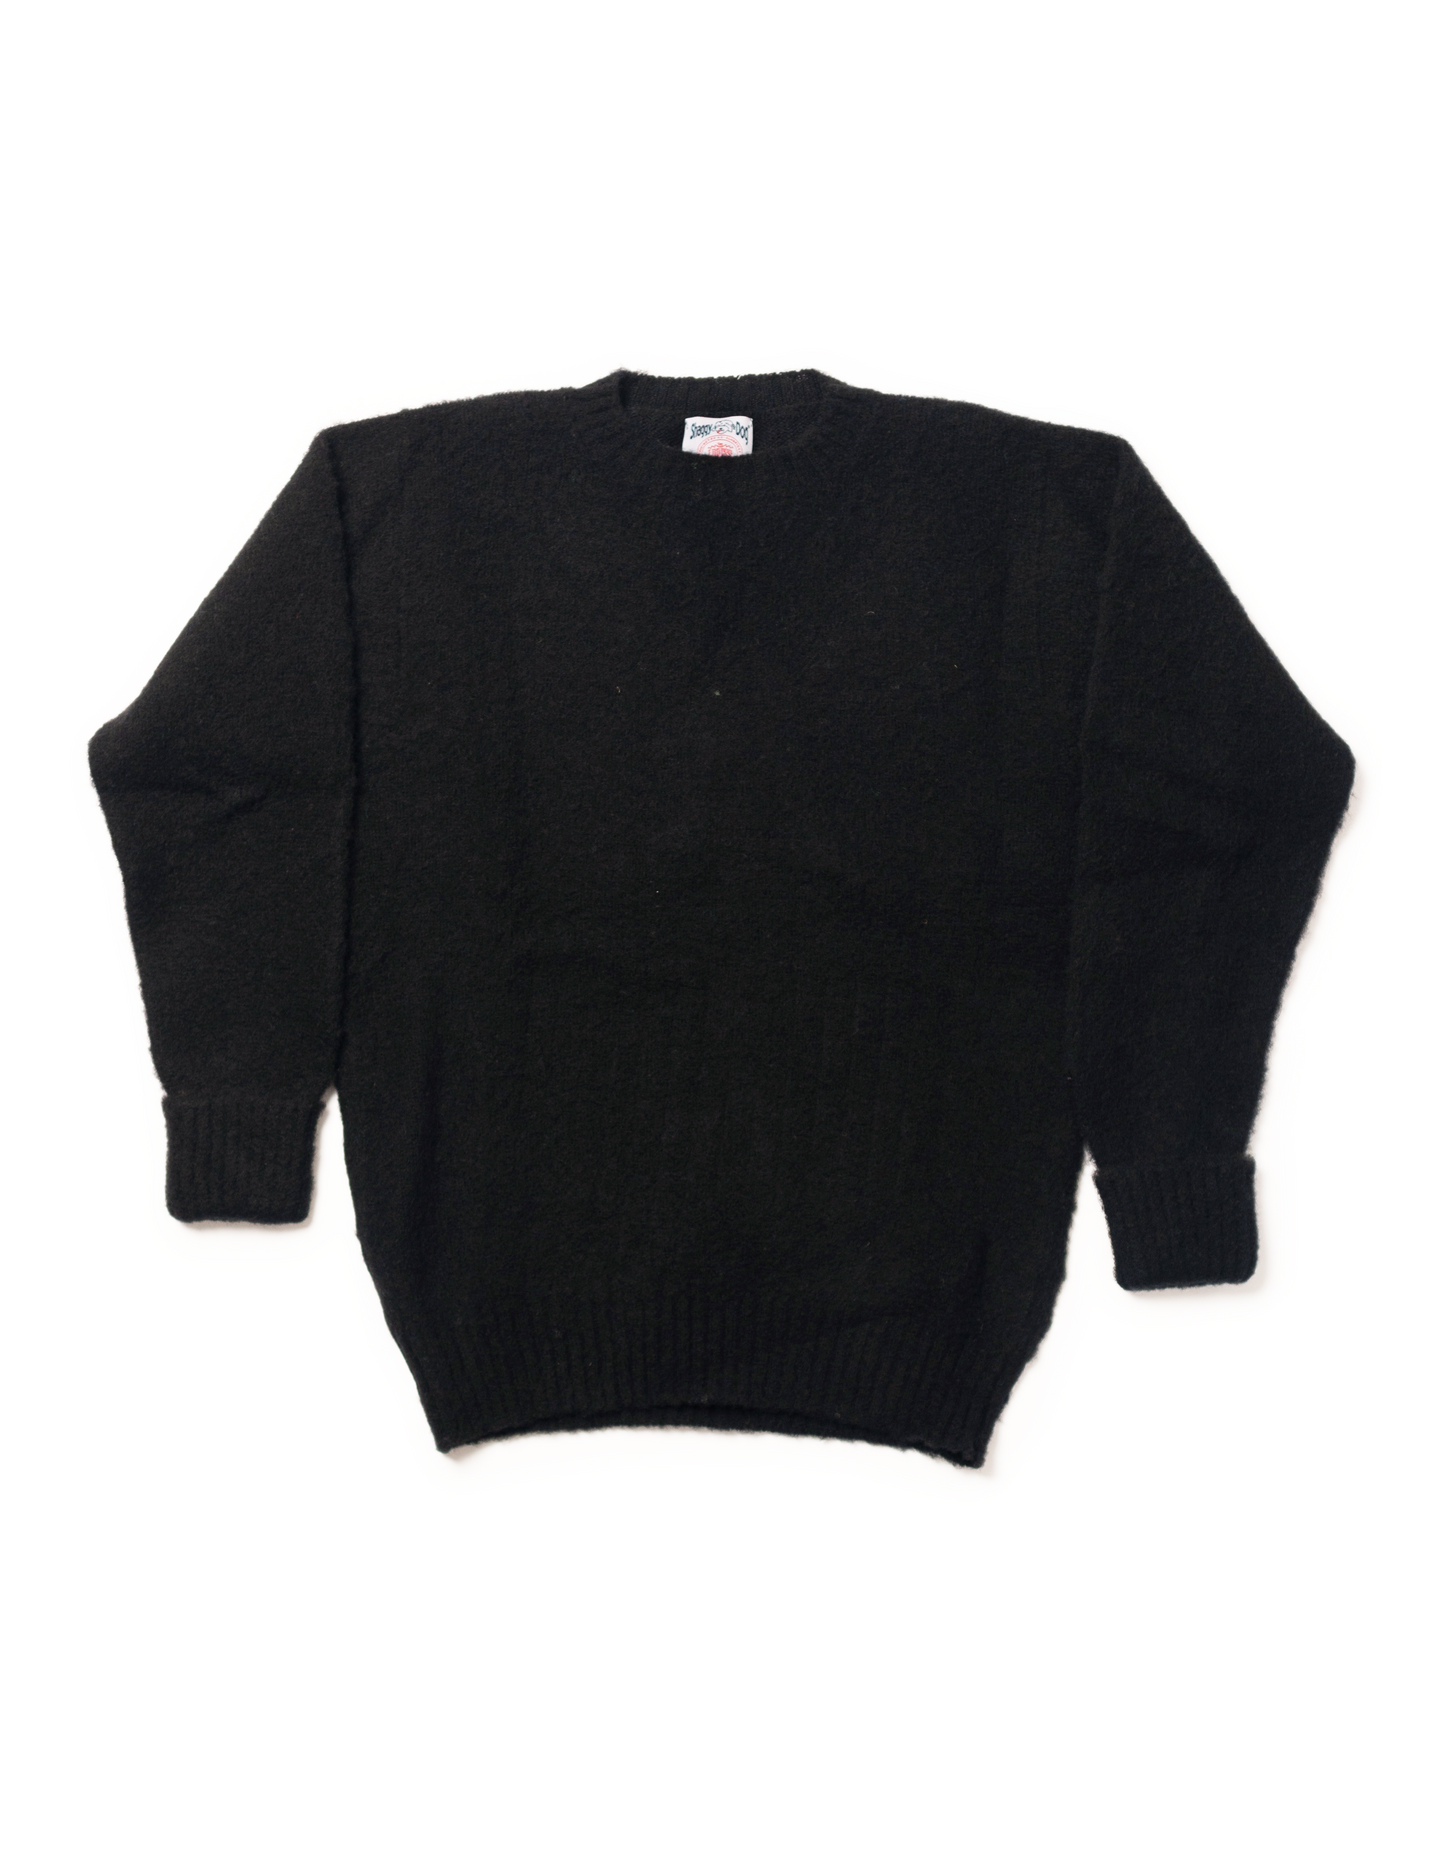 SHAGGY DOG SWEATER BLACK - CLASSIC FIT